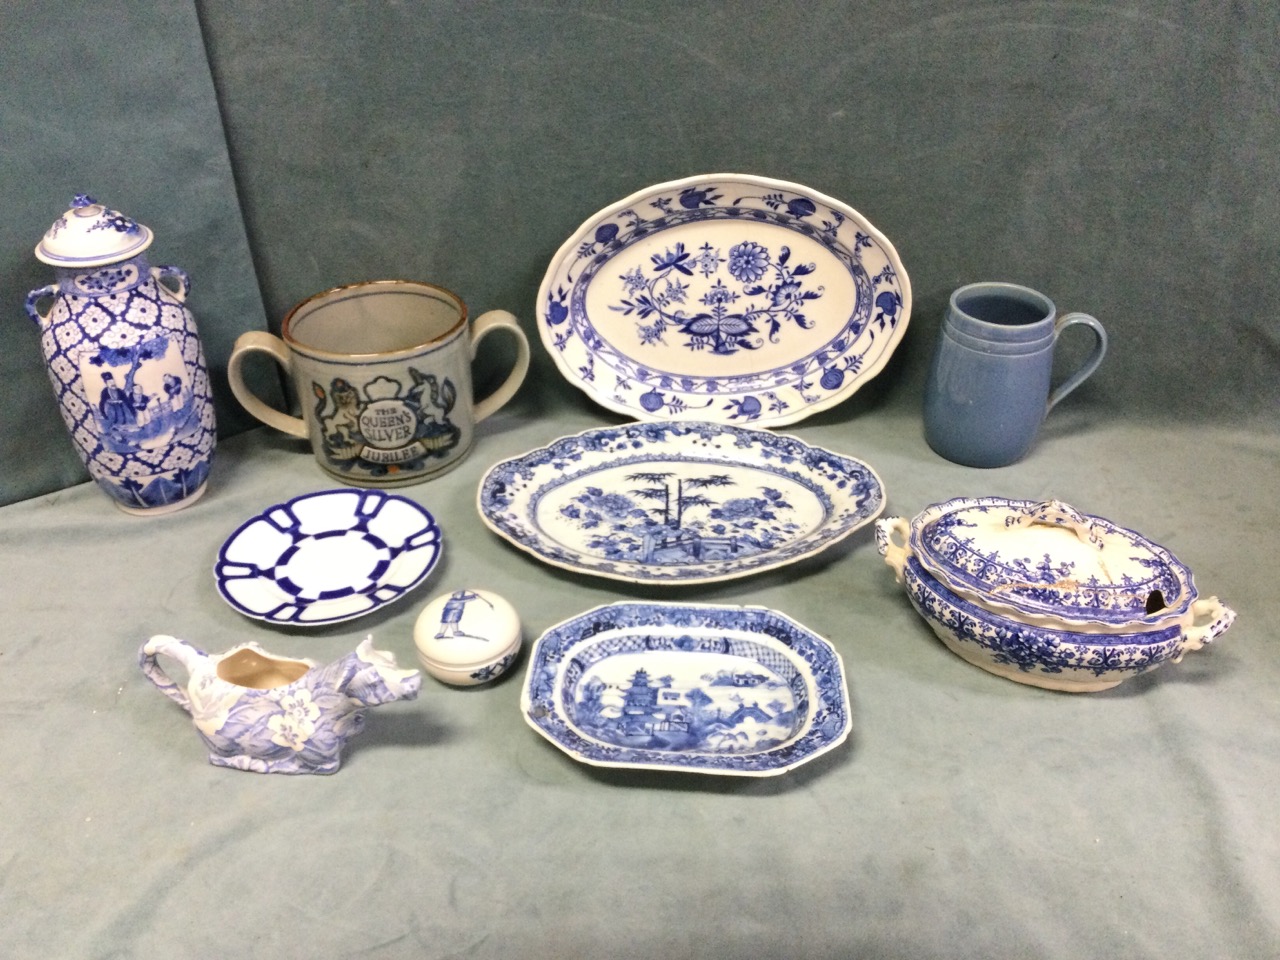 Miscellaneous blue & white ceramics - a Chinese baluster vases & cover, platters, a Burleigh cow